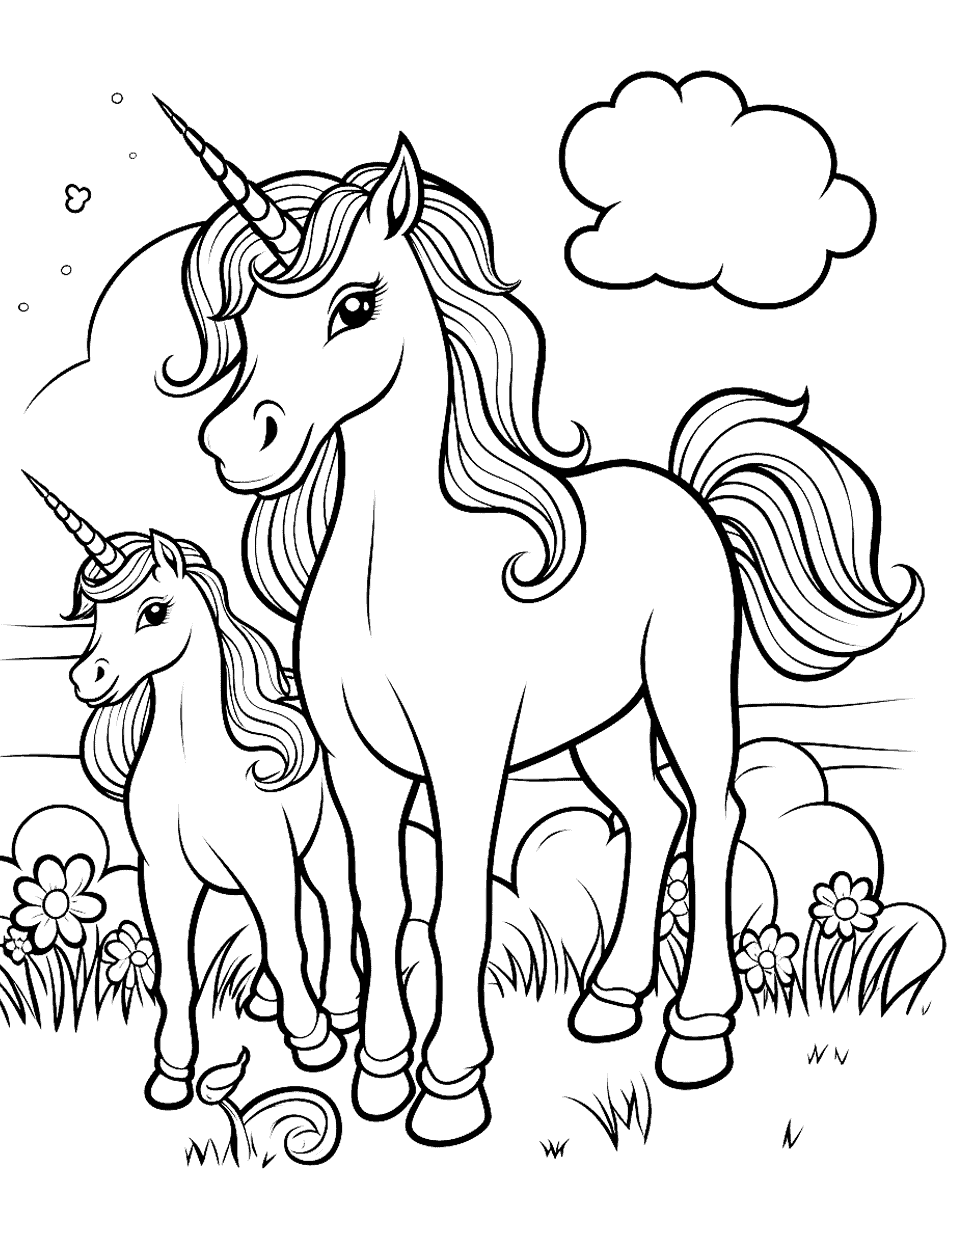 Unicorn coloring pages free printable sheets